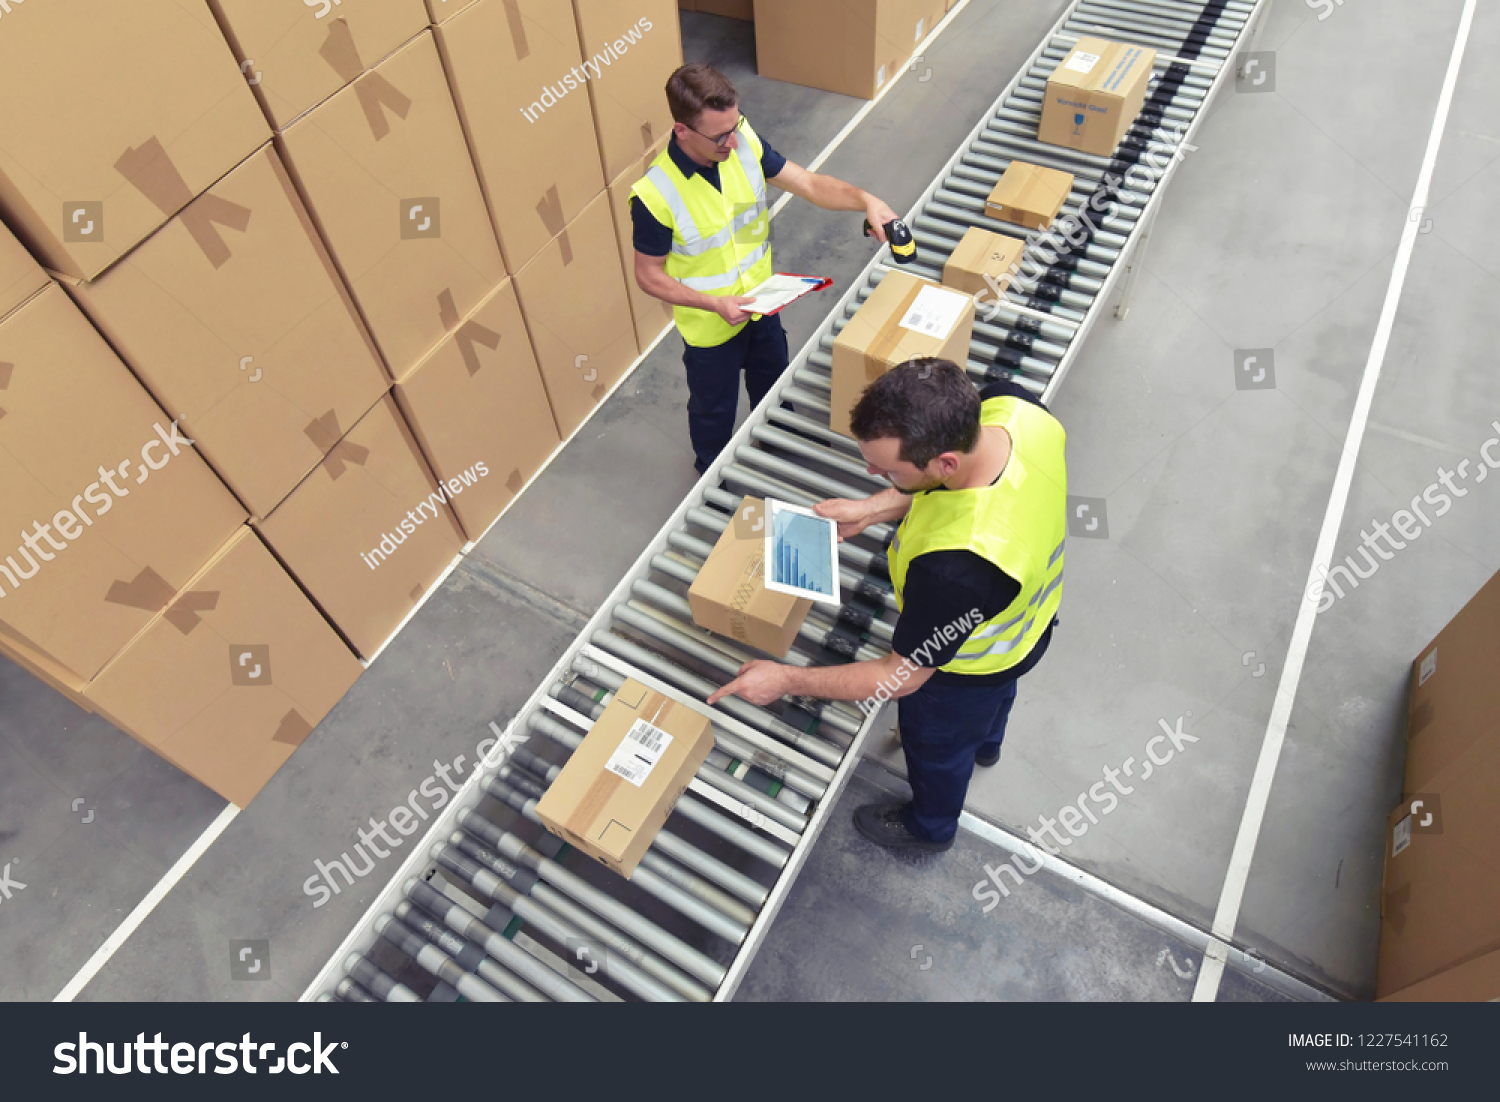 stock-photo-worker-in-a-warehouse-in-the-logistics-sector-processing-packages-on-the-assembly-line-transport-1227541162